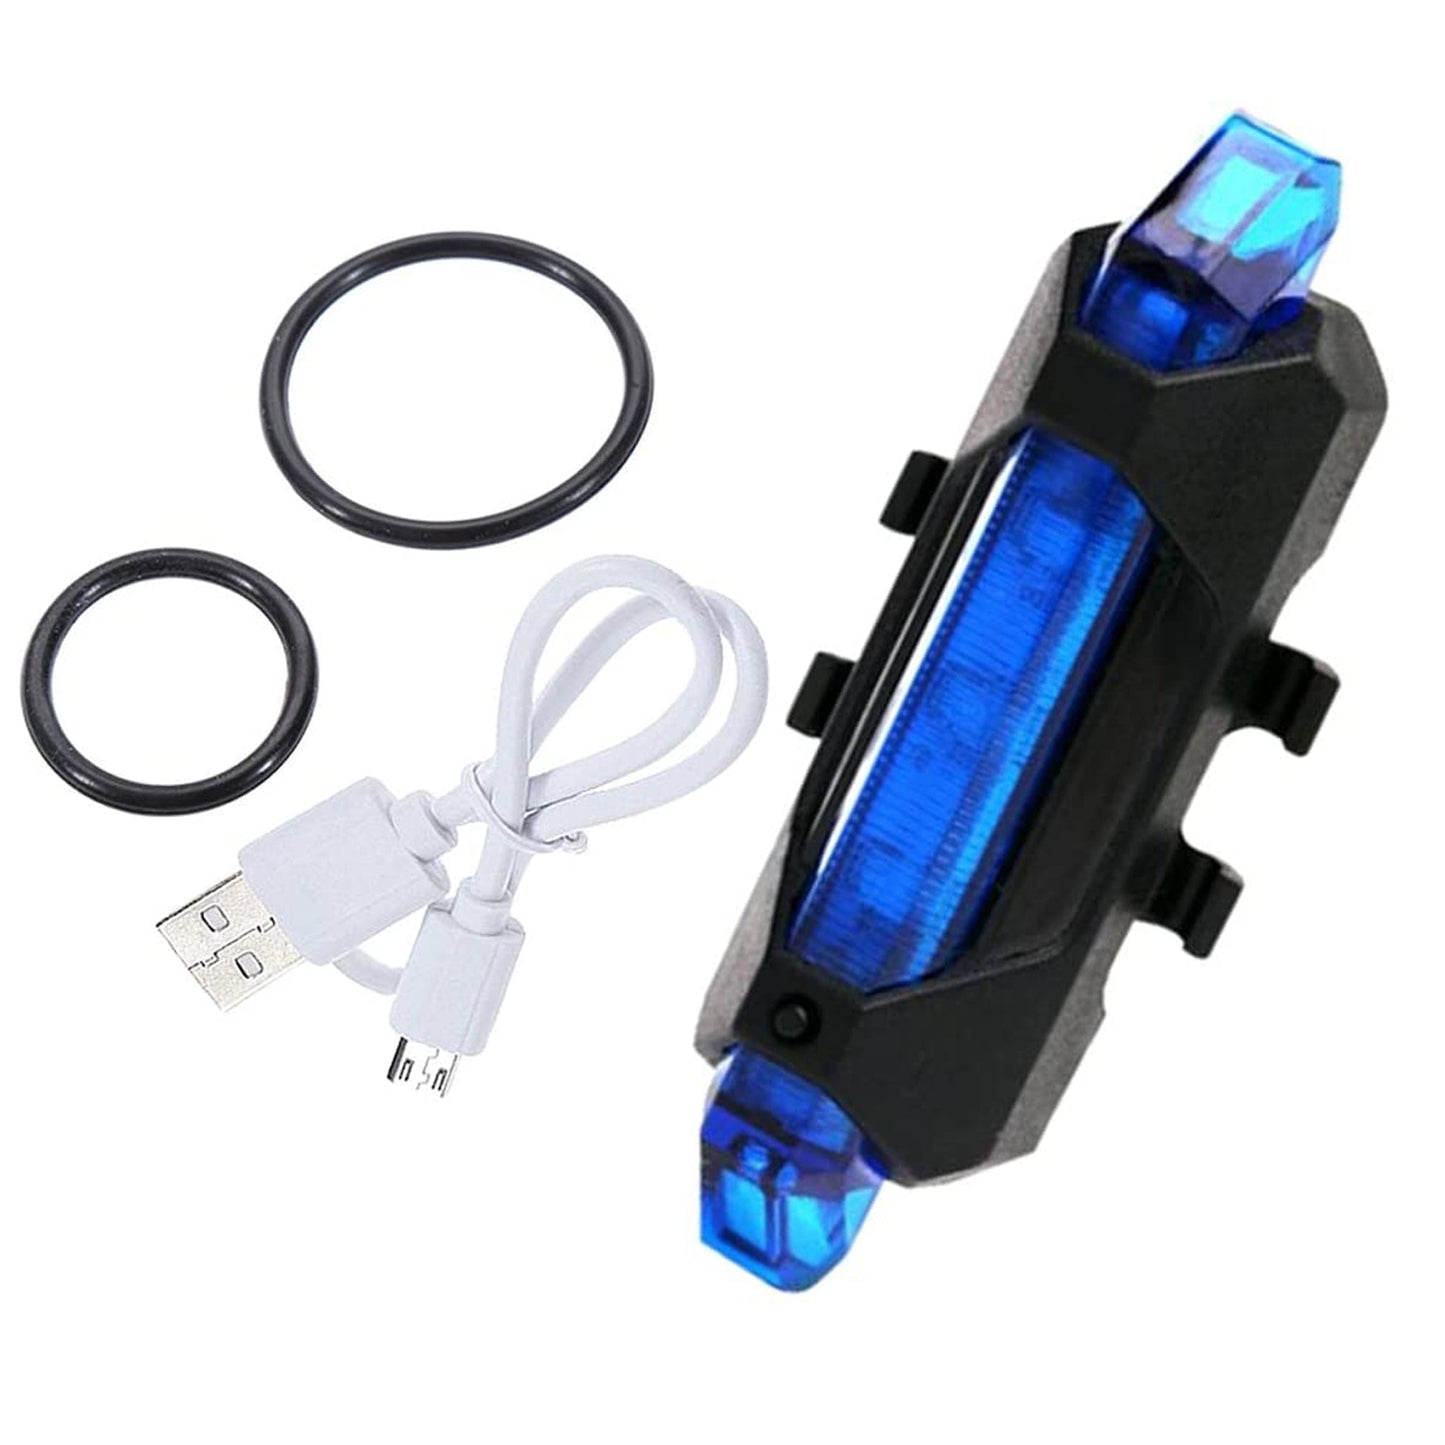 1617 Rechargeable Bicycle Front Waterproof LED Light (Blue) 